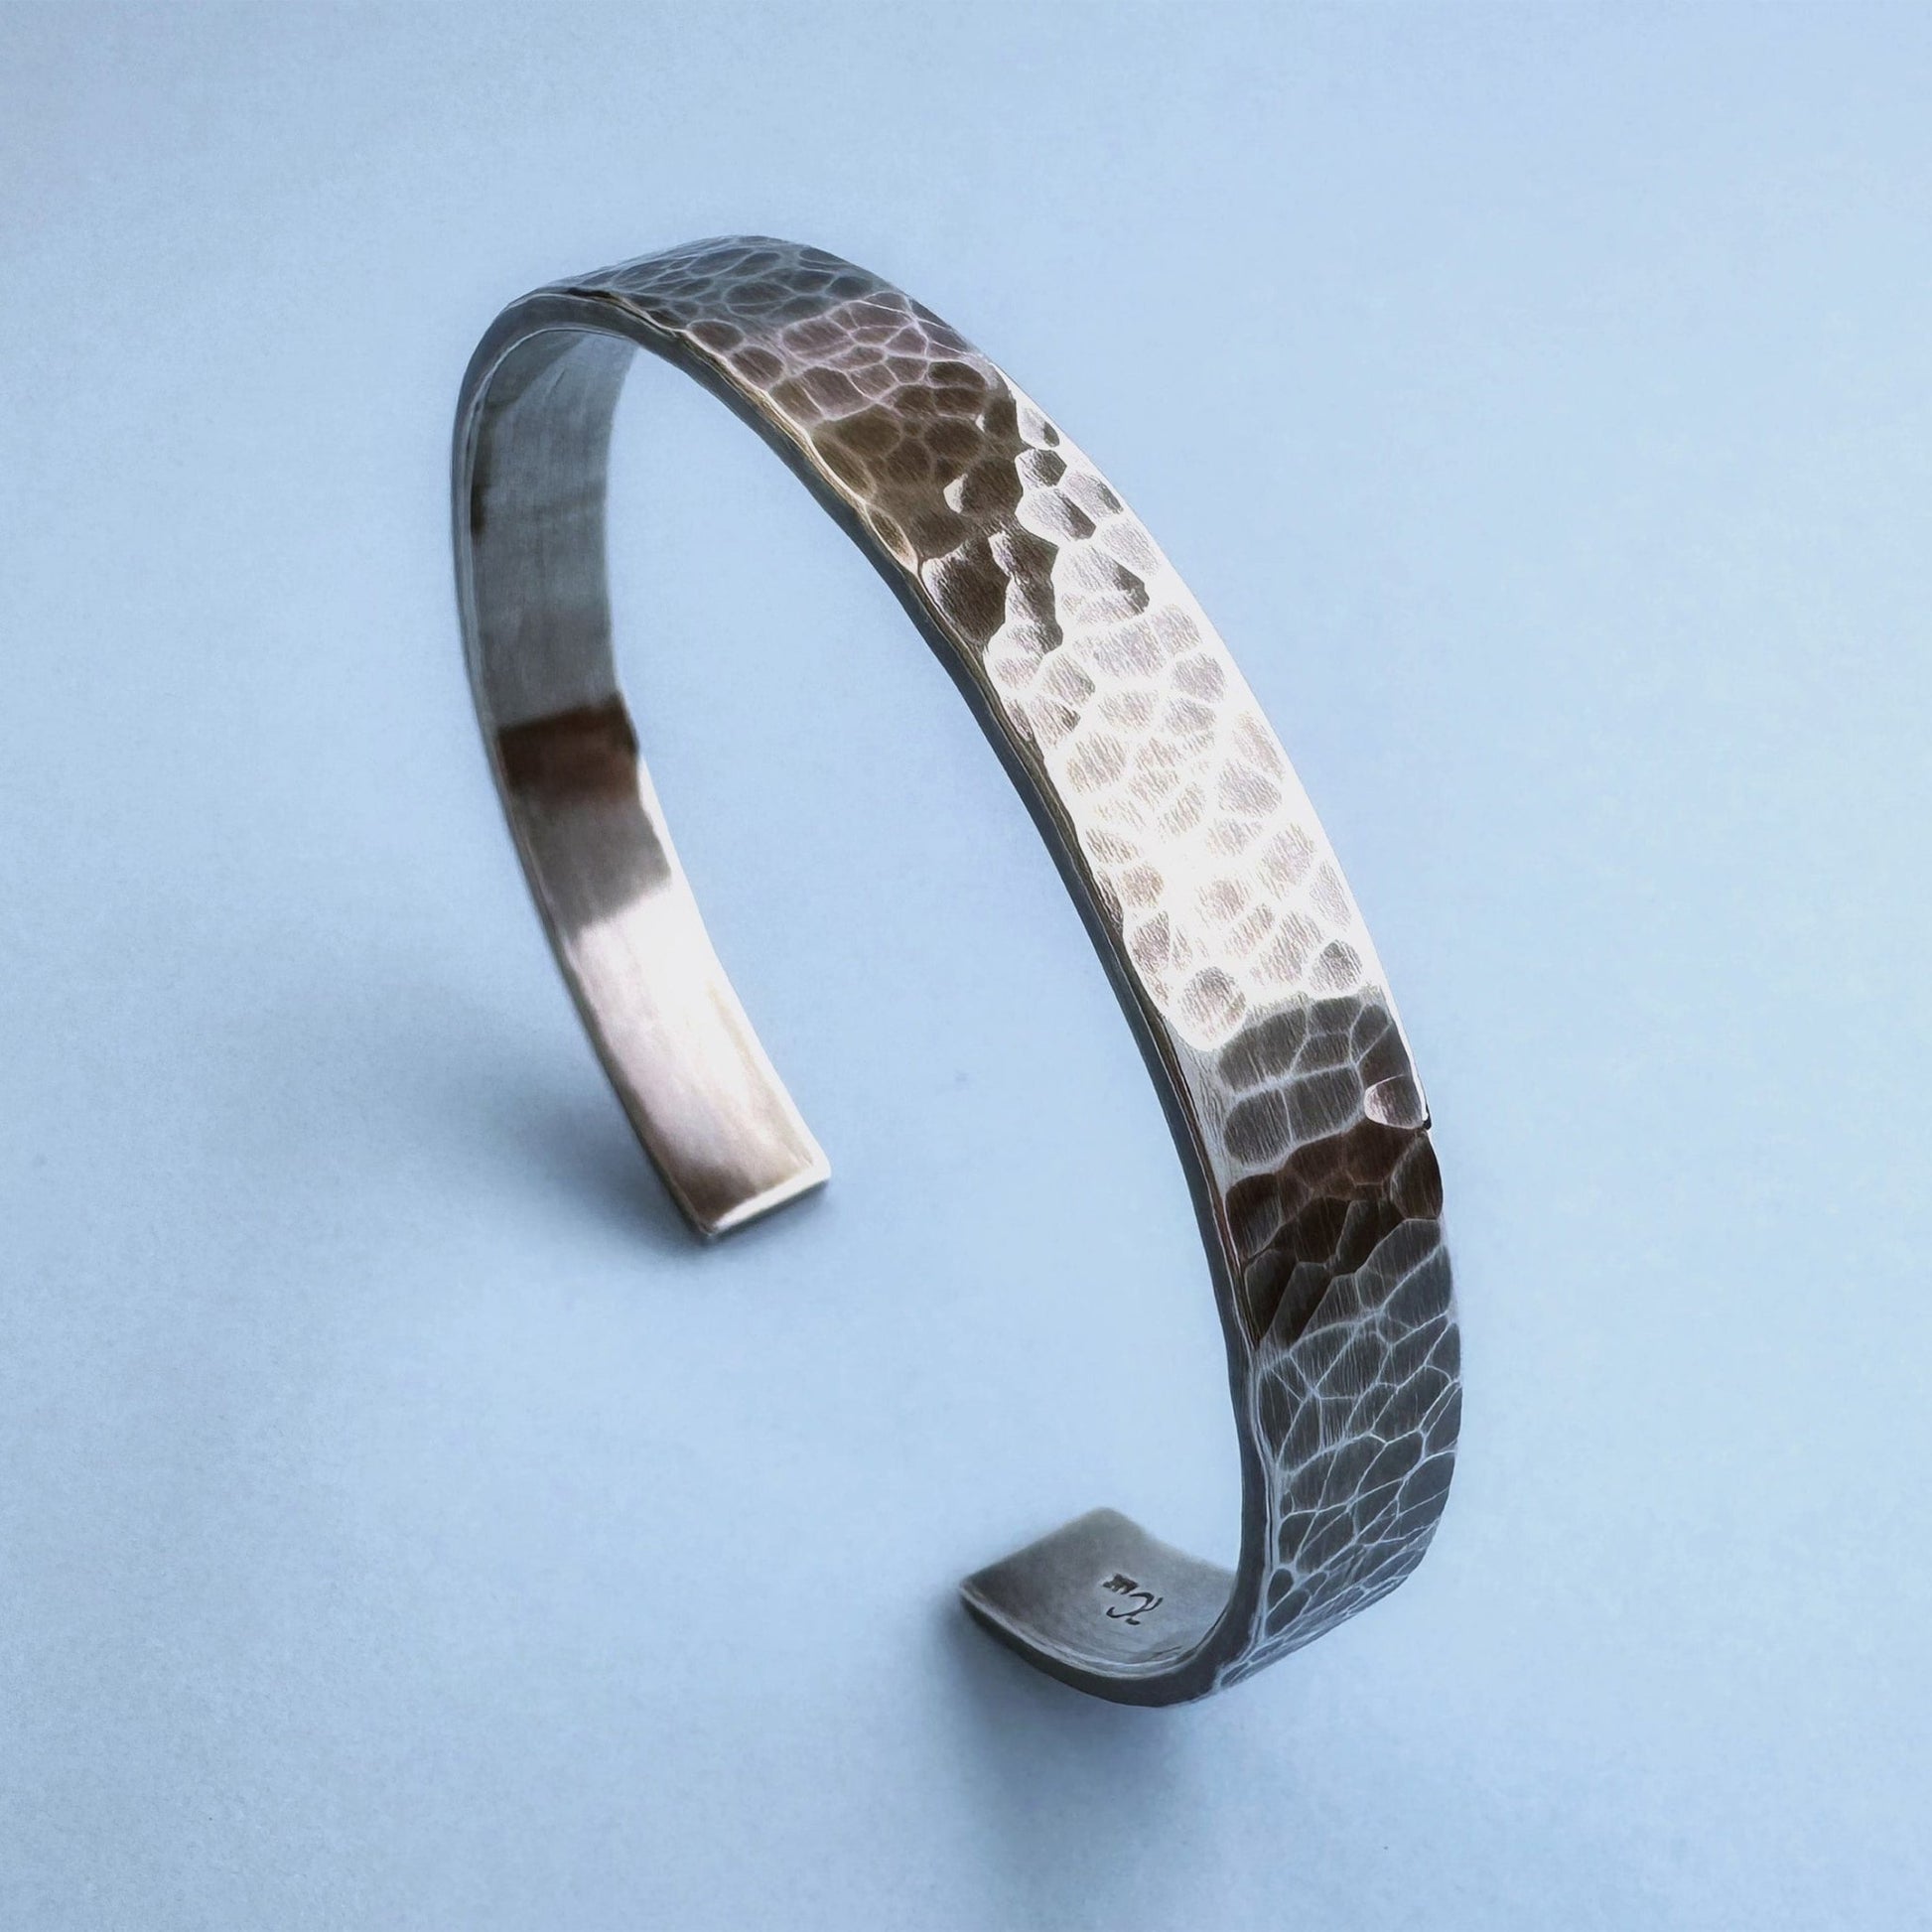 A heavy, hammered/beaten sterling silver cuff bracelet with a blackened finish is standing on a pale blue background. 